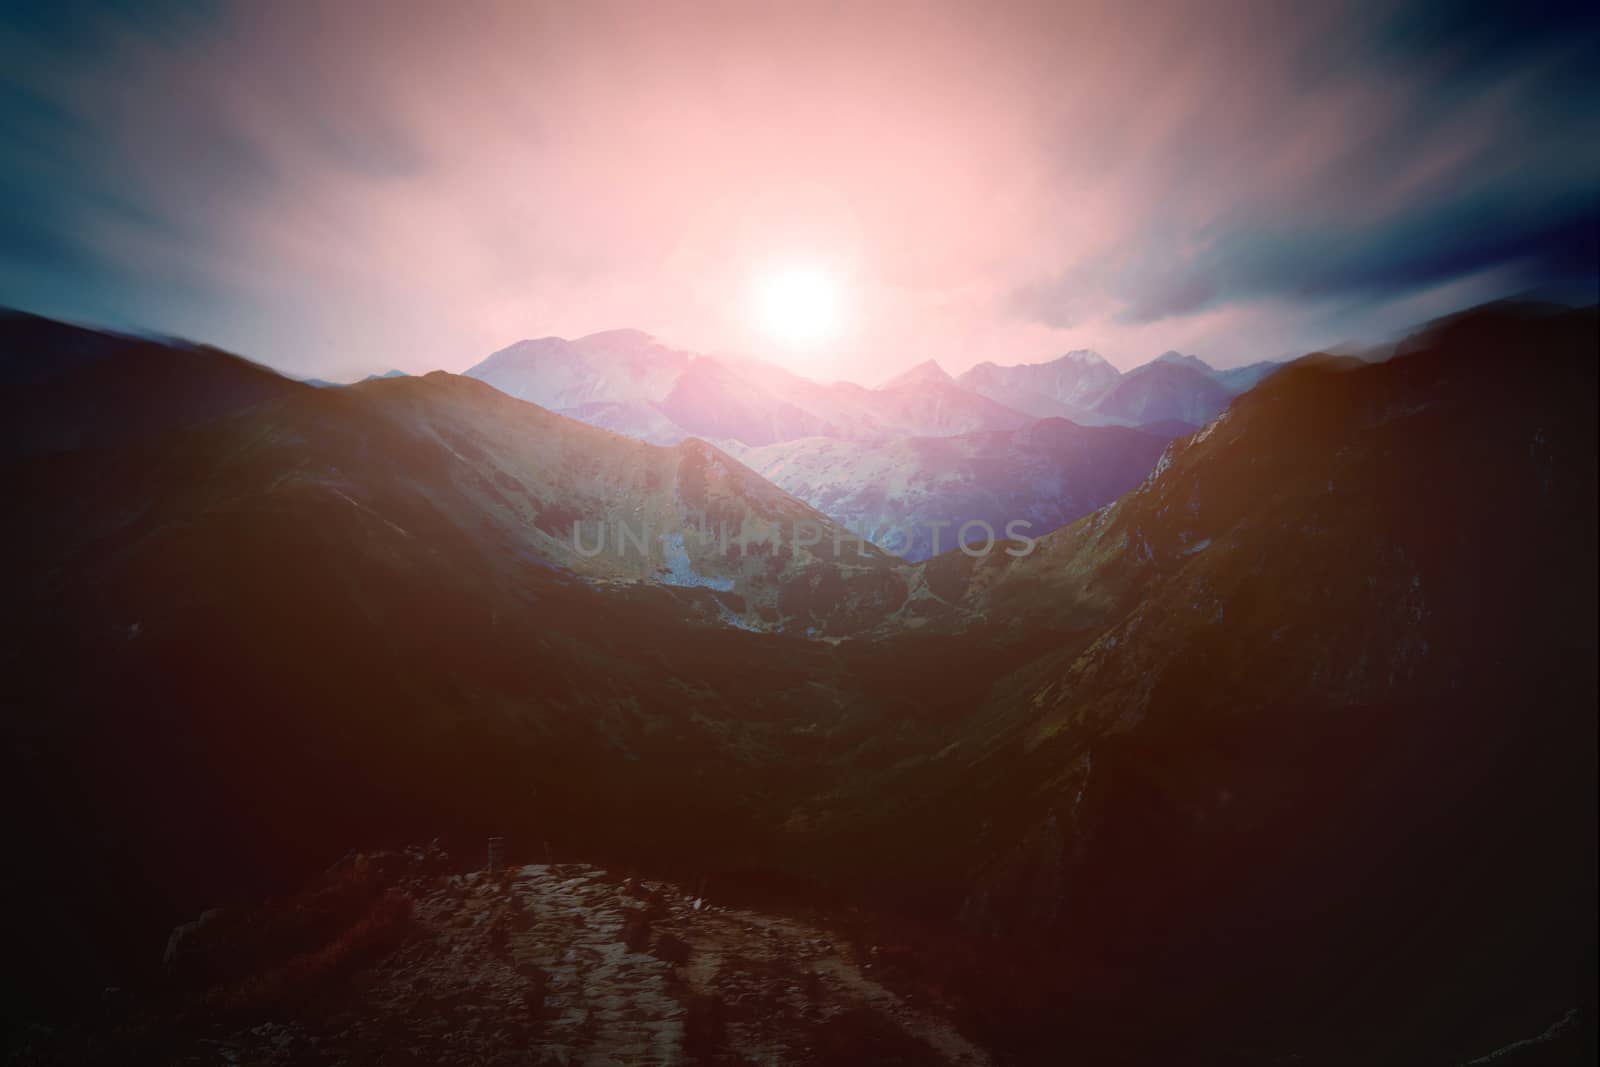 Dark abstract mountains landscape. Nature conceptual image.